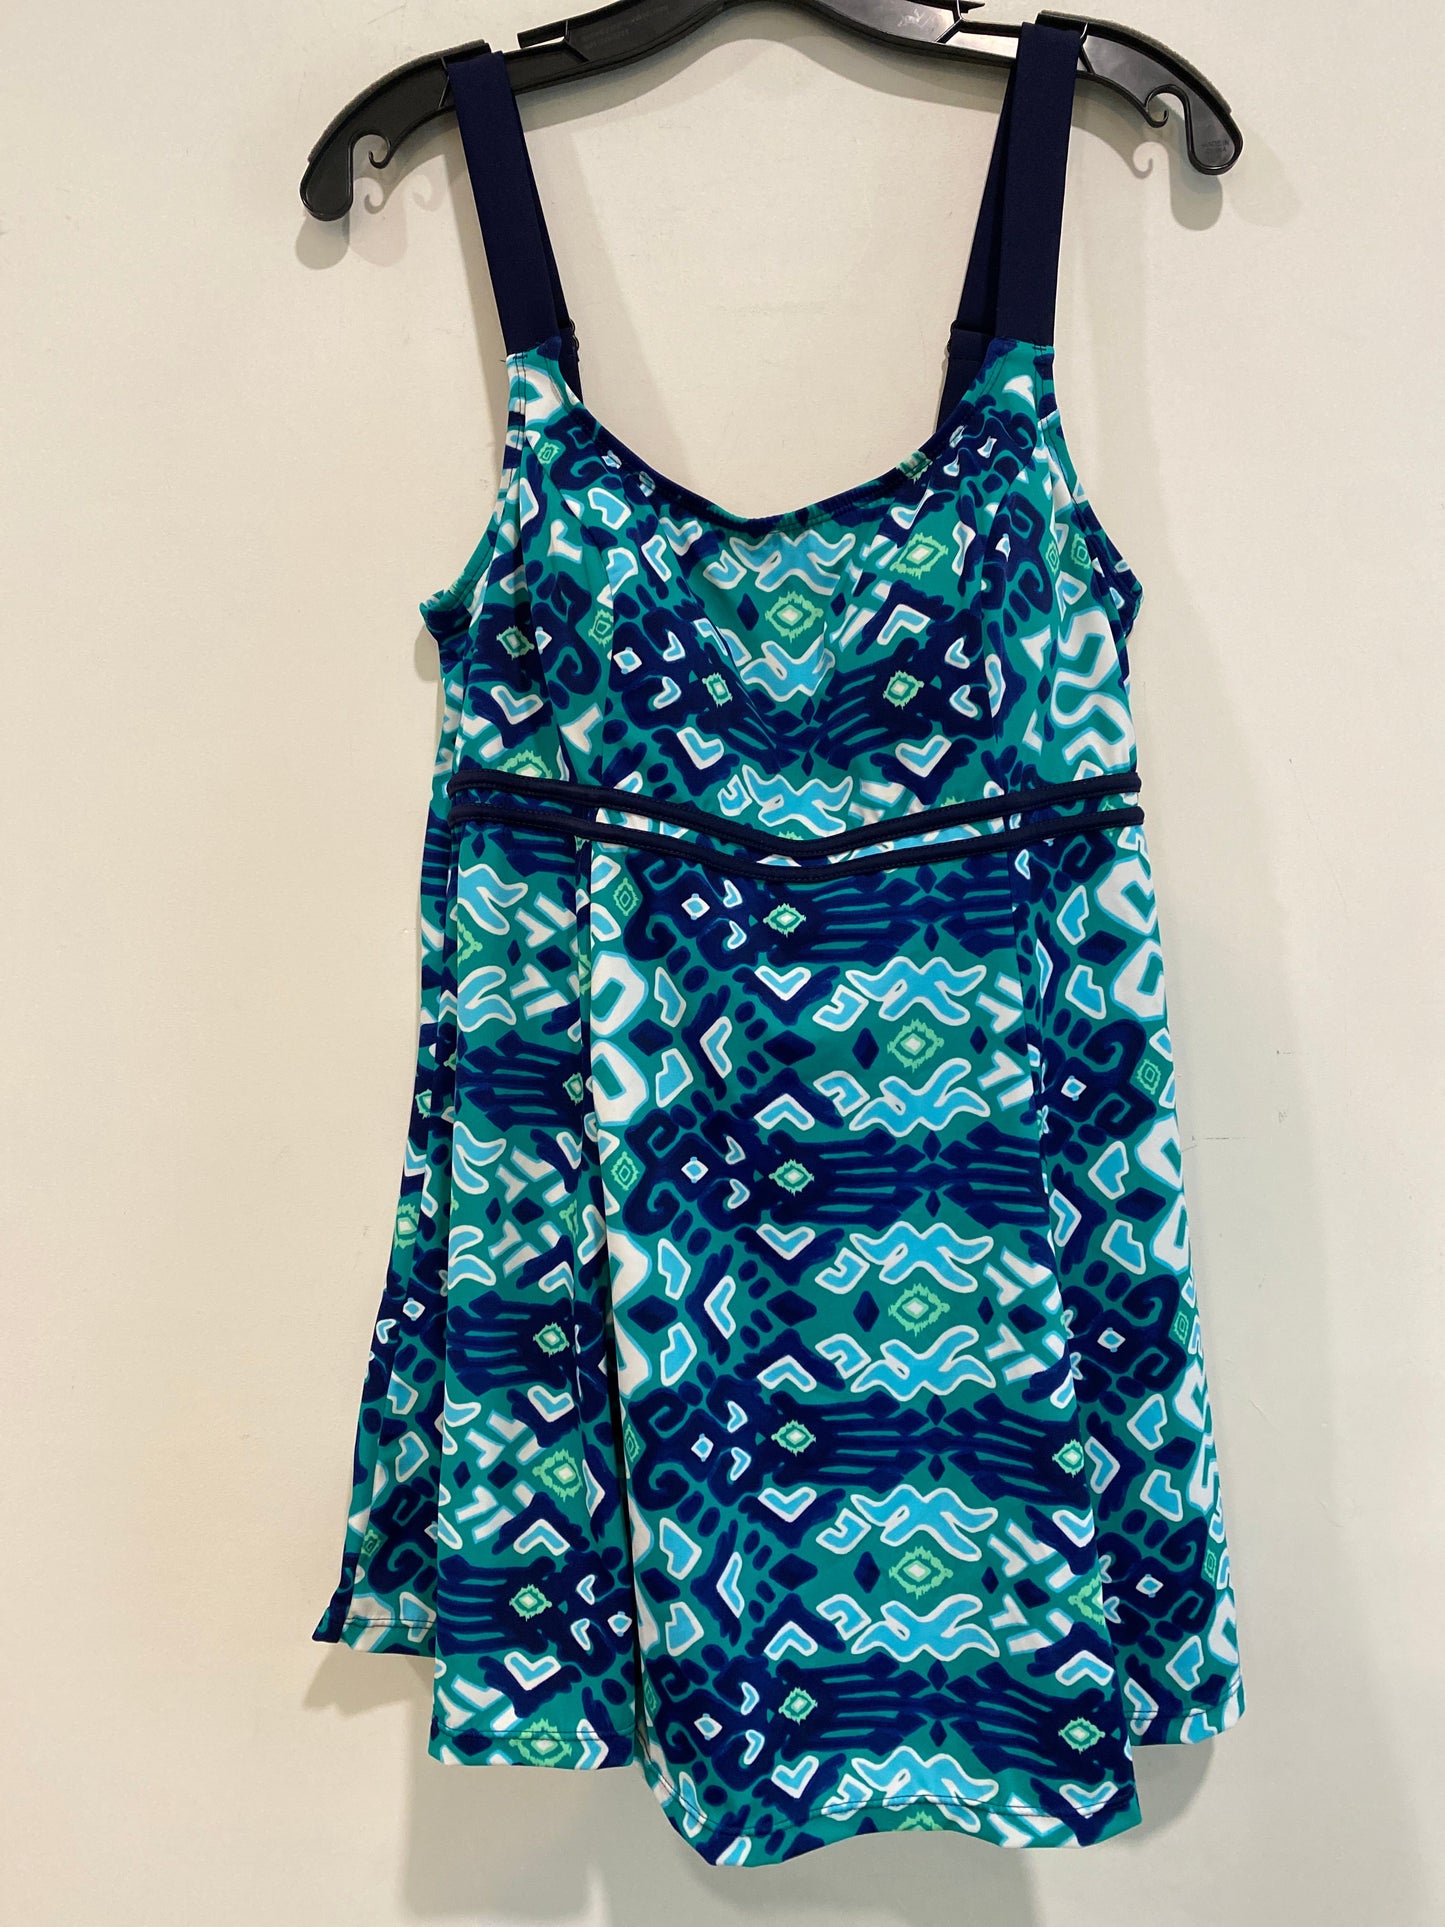 Blue & Green Swimsuit Clothes Mentor, Size Xl